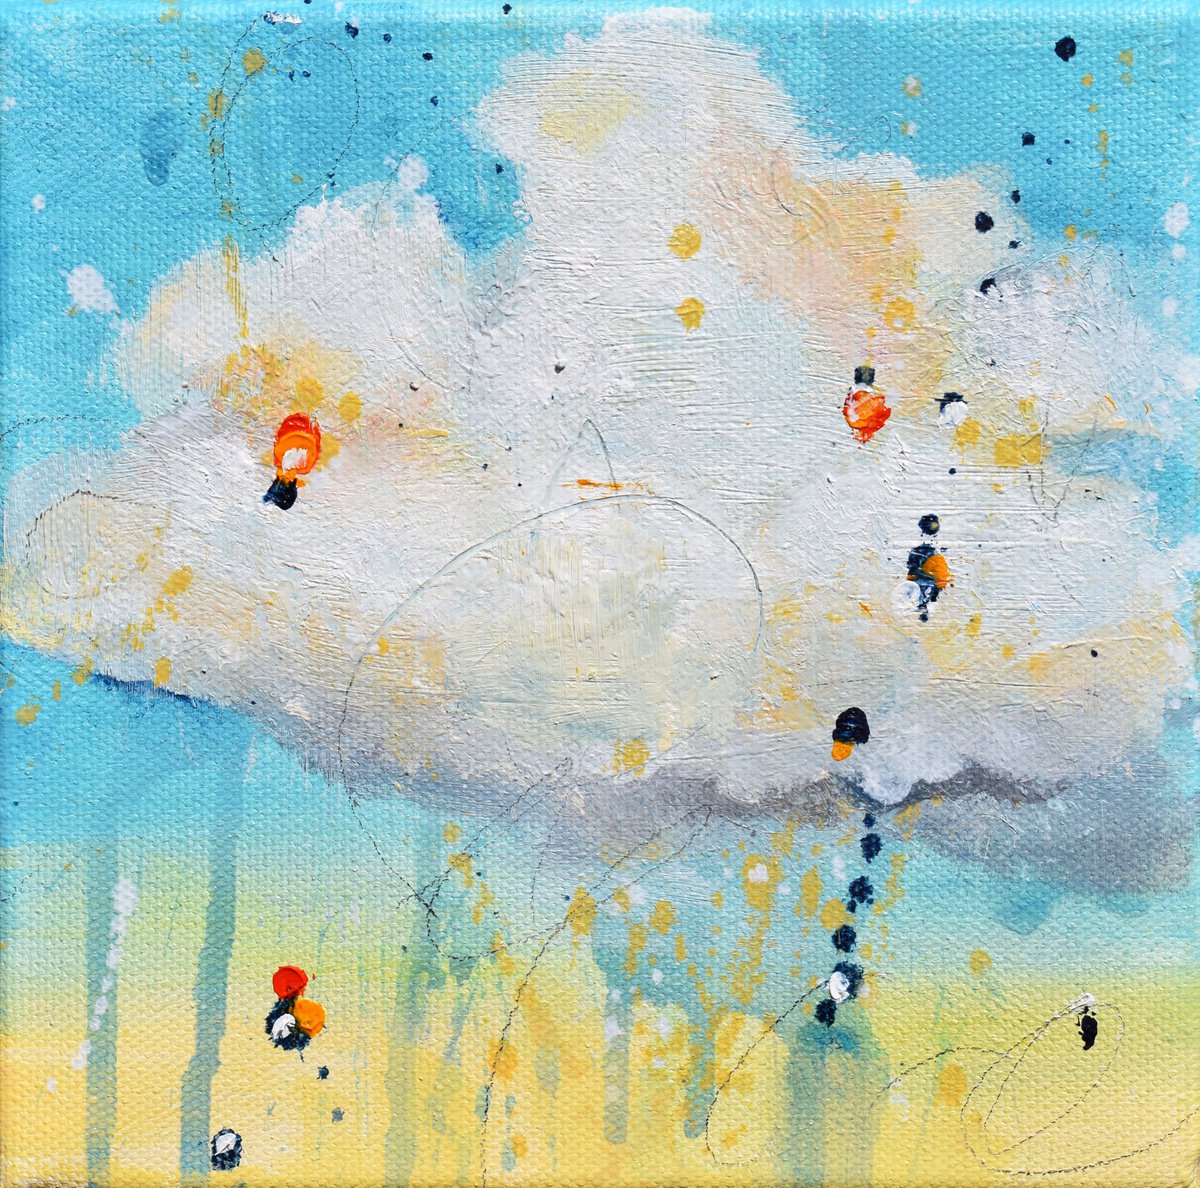 Noonday Dreams - 6 x 6 IN / 15 x 15 CM - Oil Painting on Canvas, Ready to Hang by Cynthia Ligeros